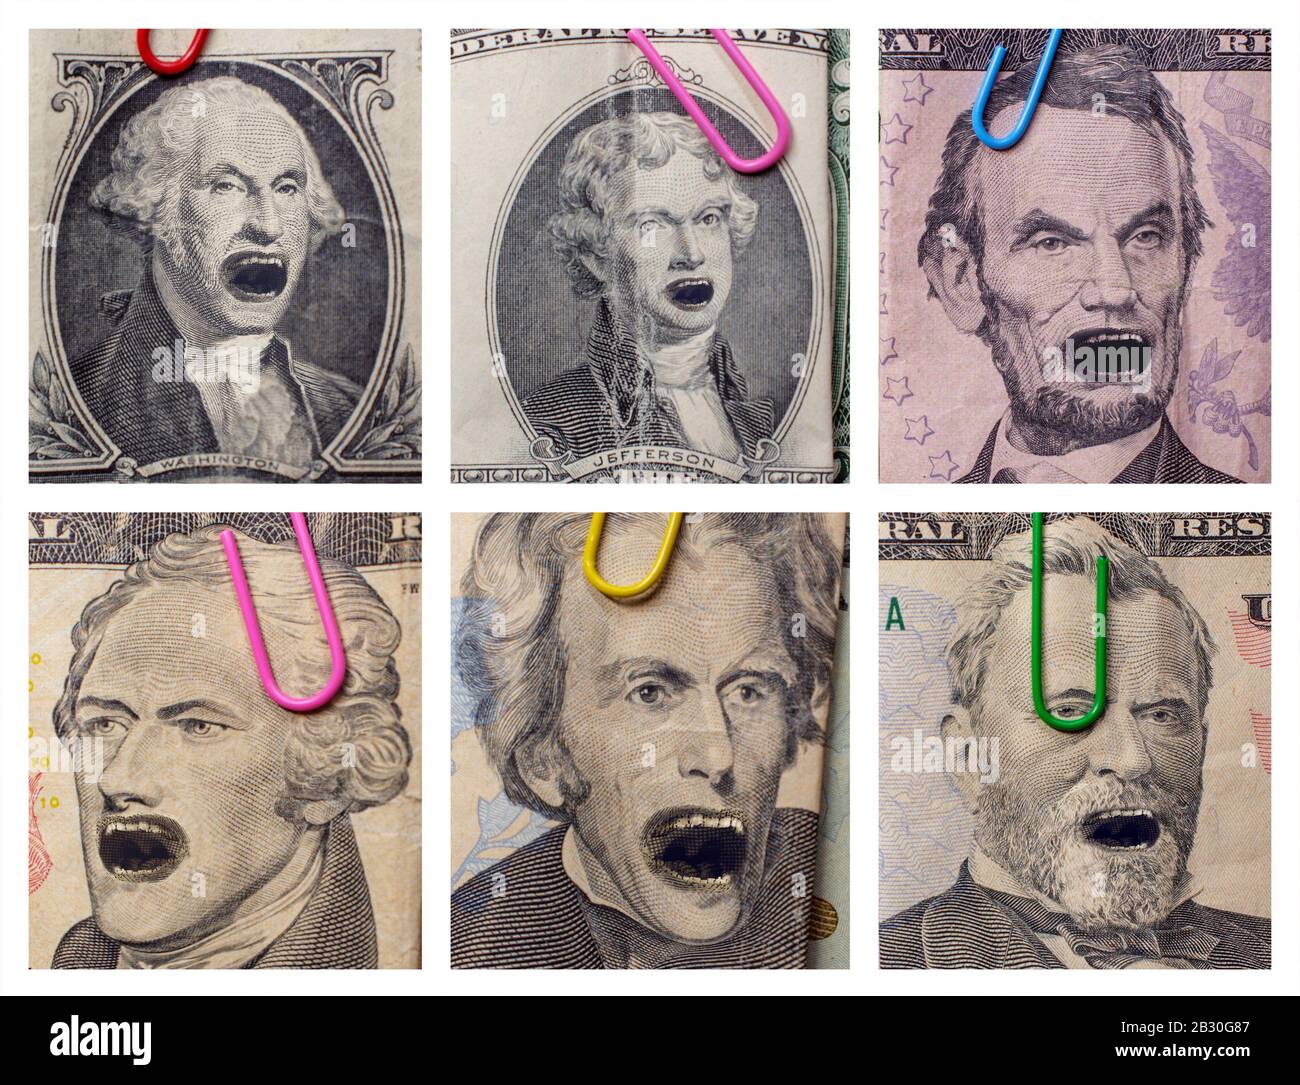 Angry founding fathers yelling in pictures on American money Stock Photo